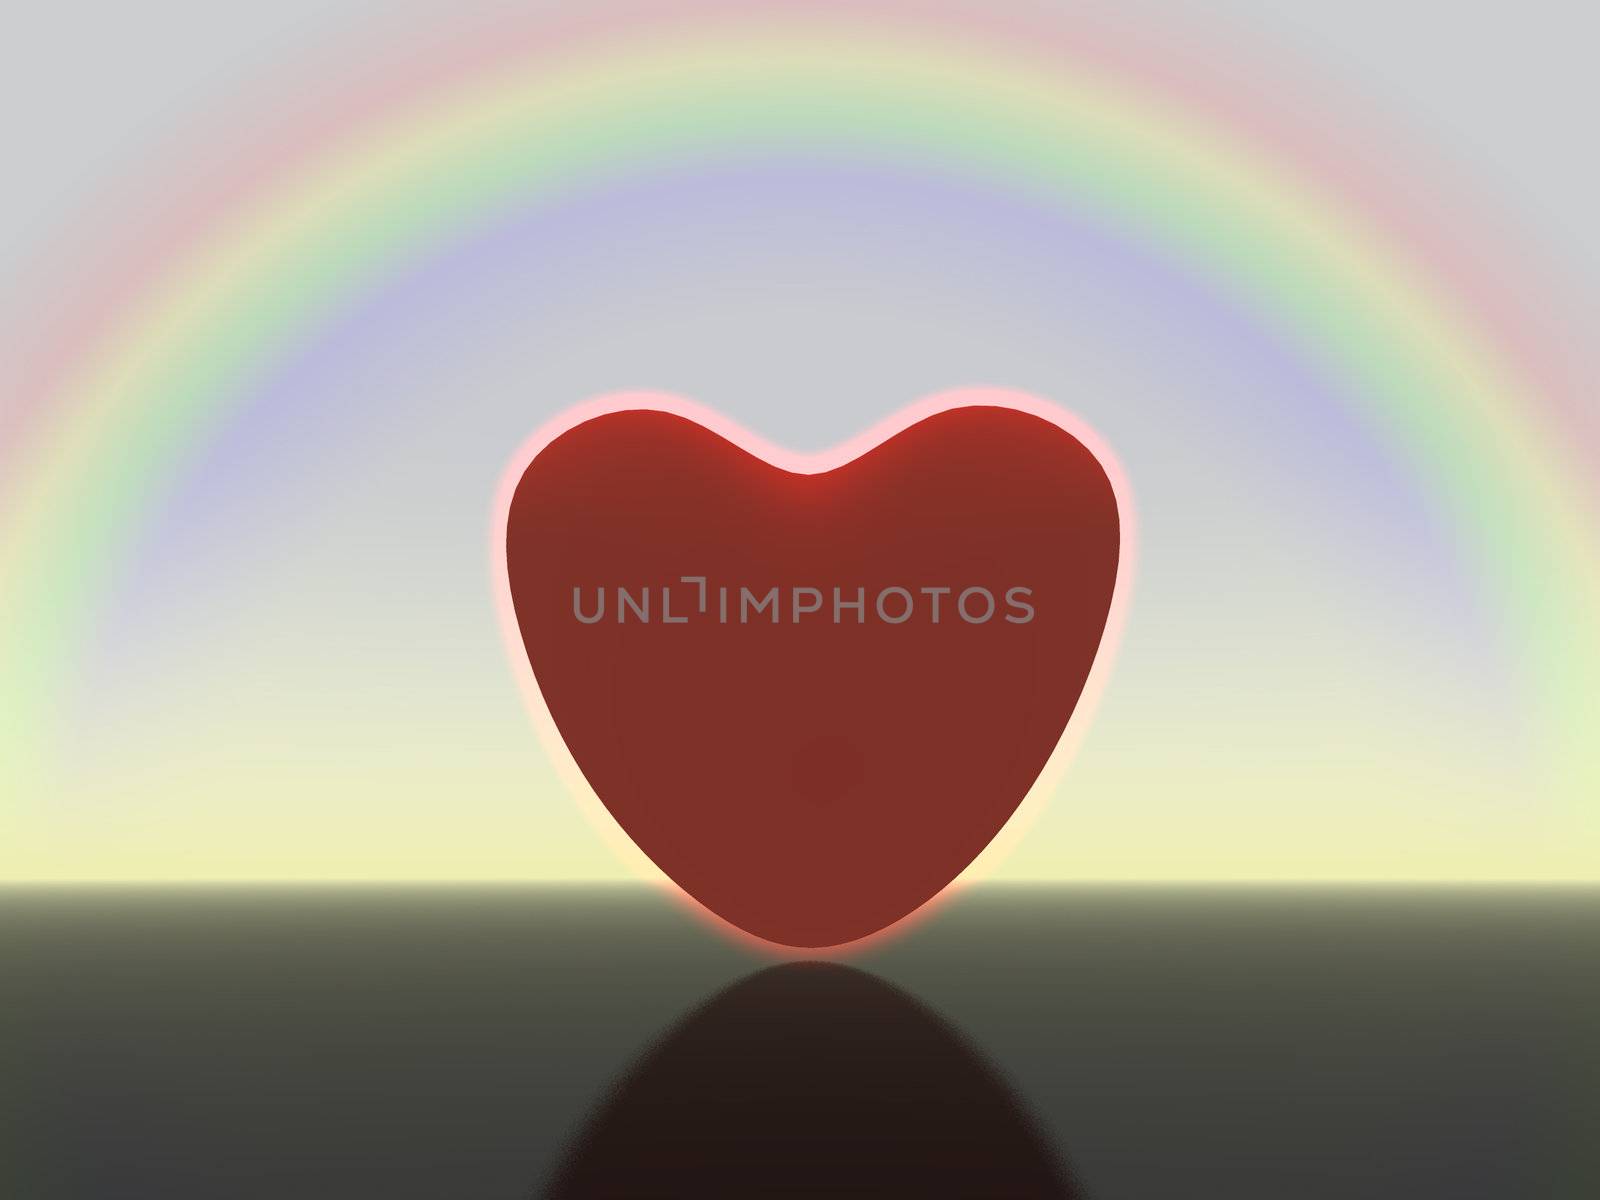 shining heart on a background of the sated dark blue sky and a rainbow